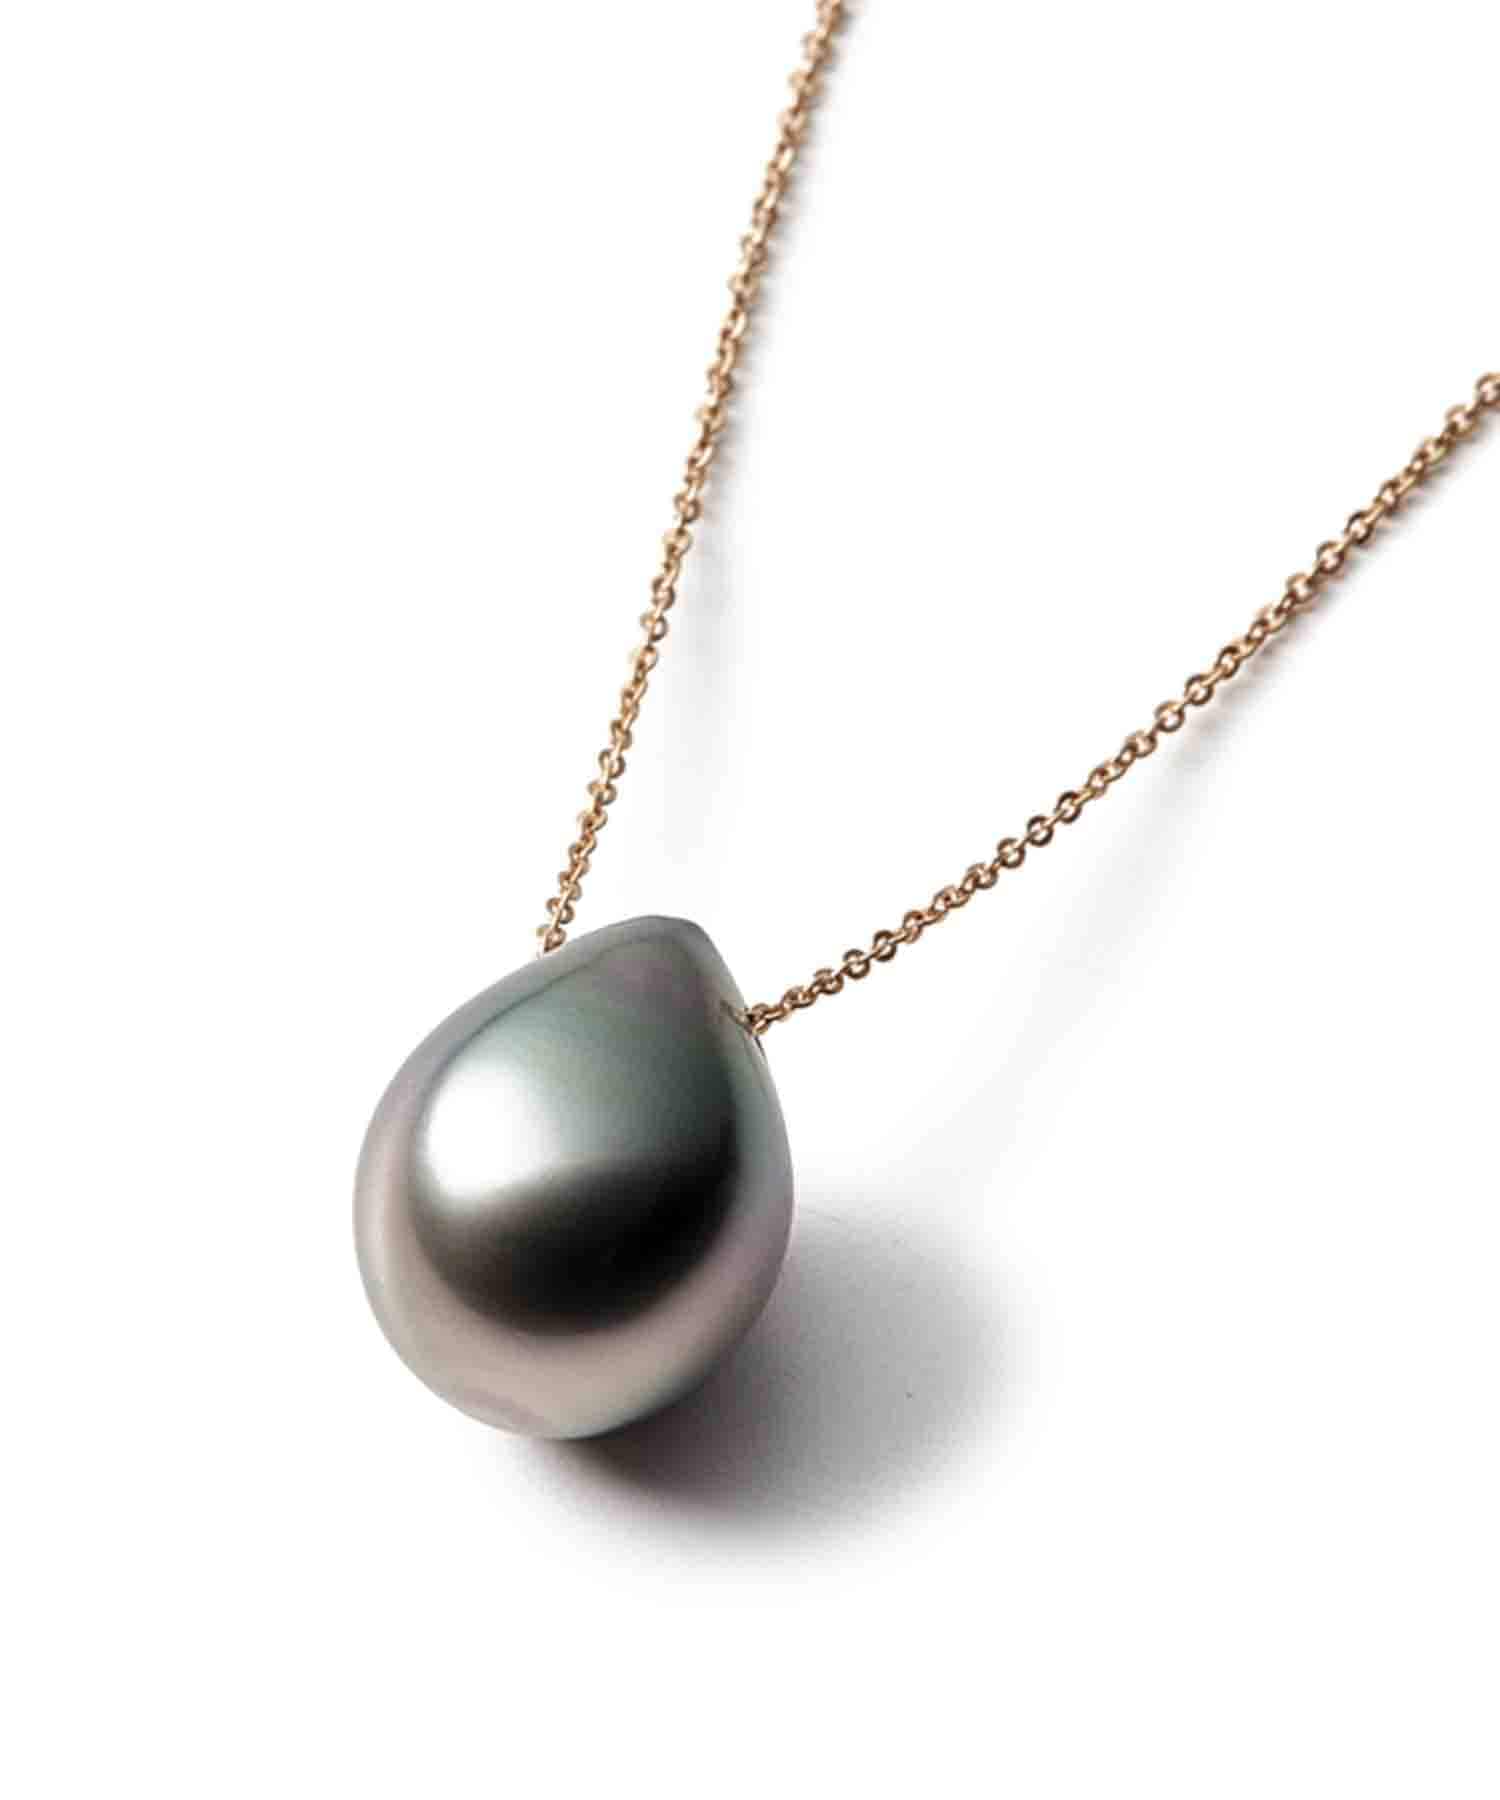 K18 yellow gold　tahitian pearl necklace